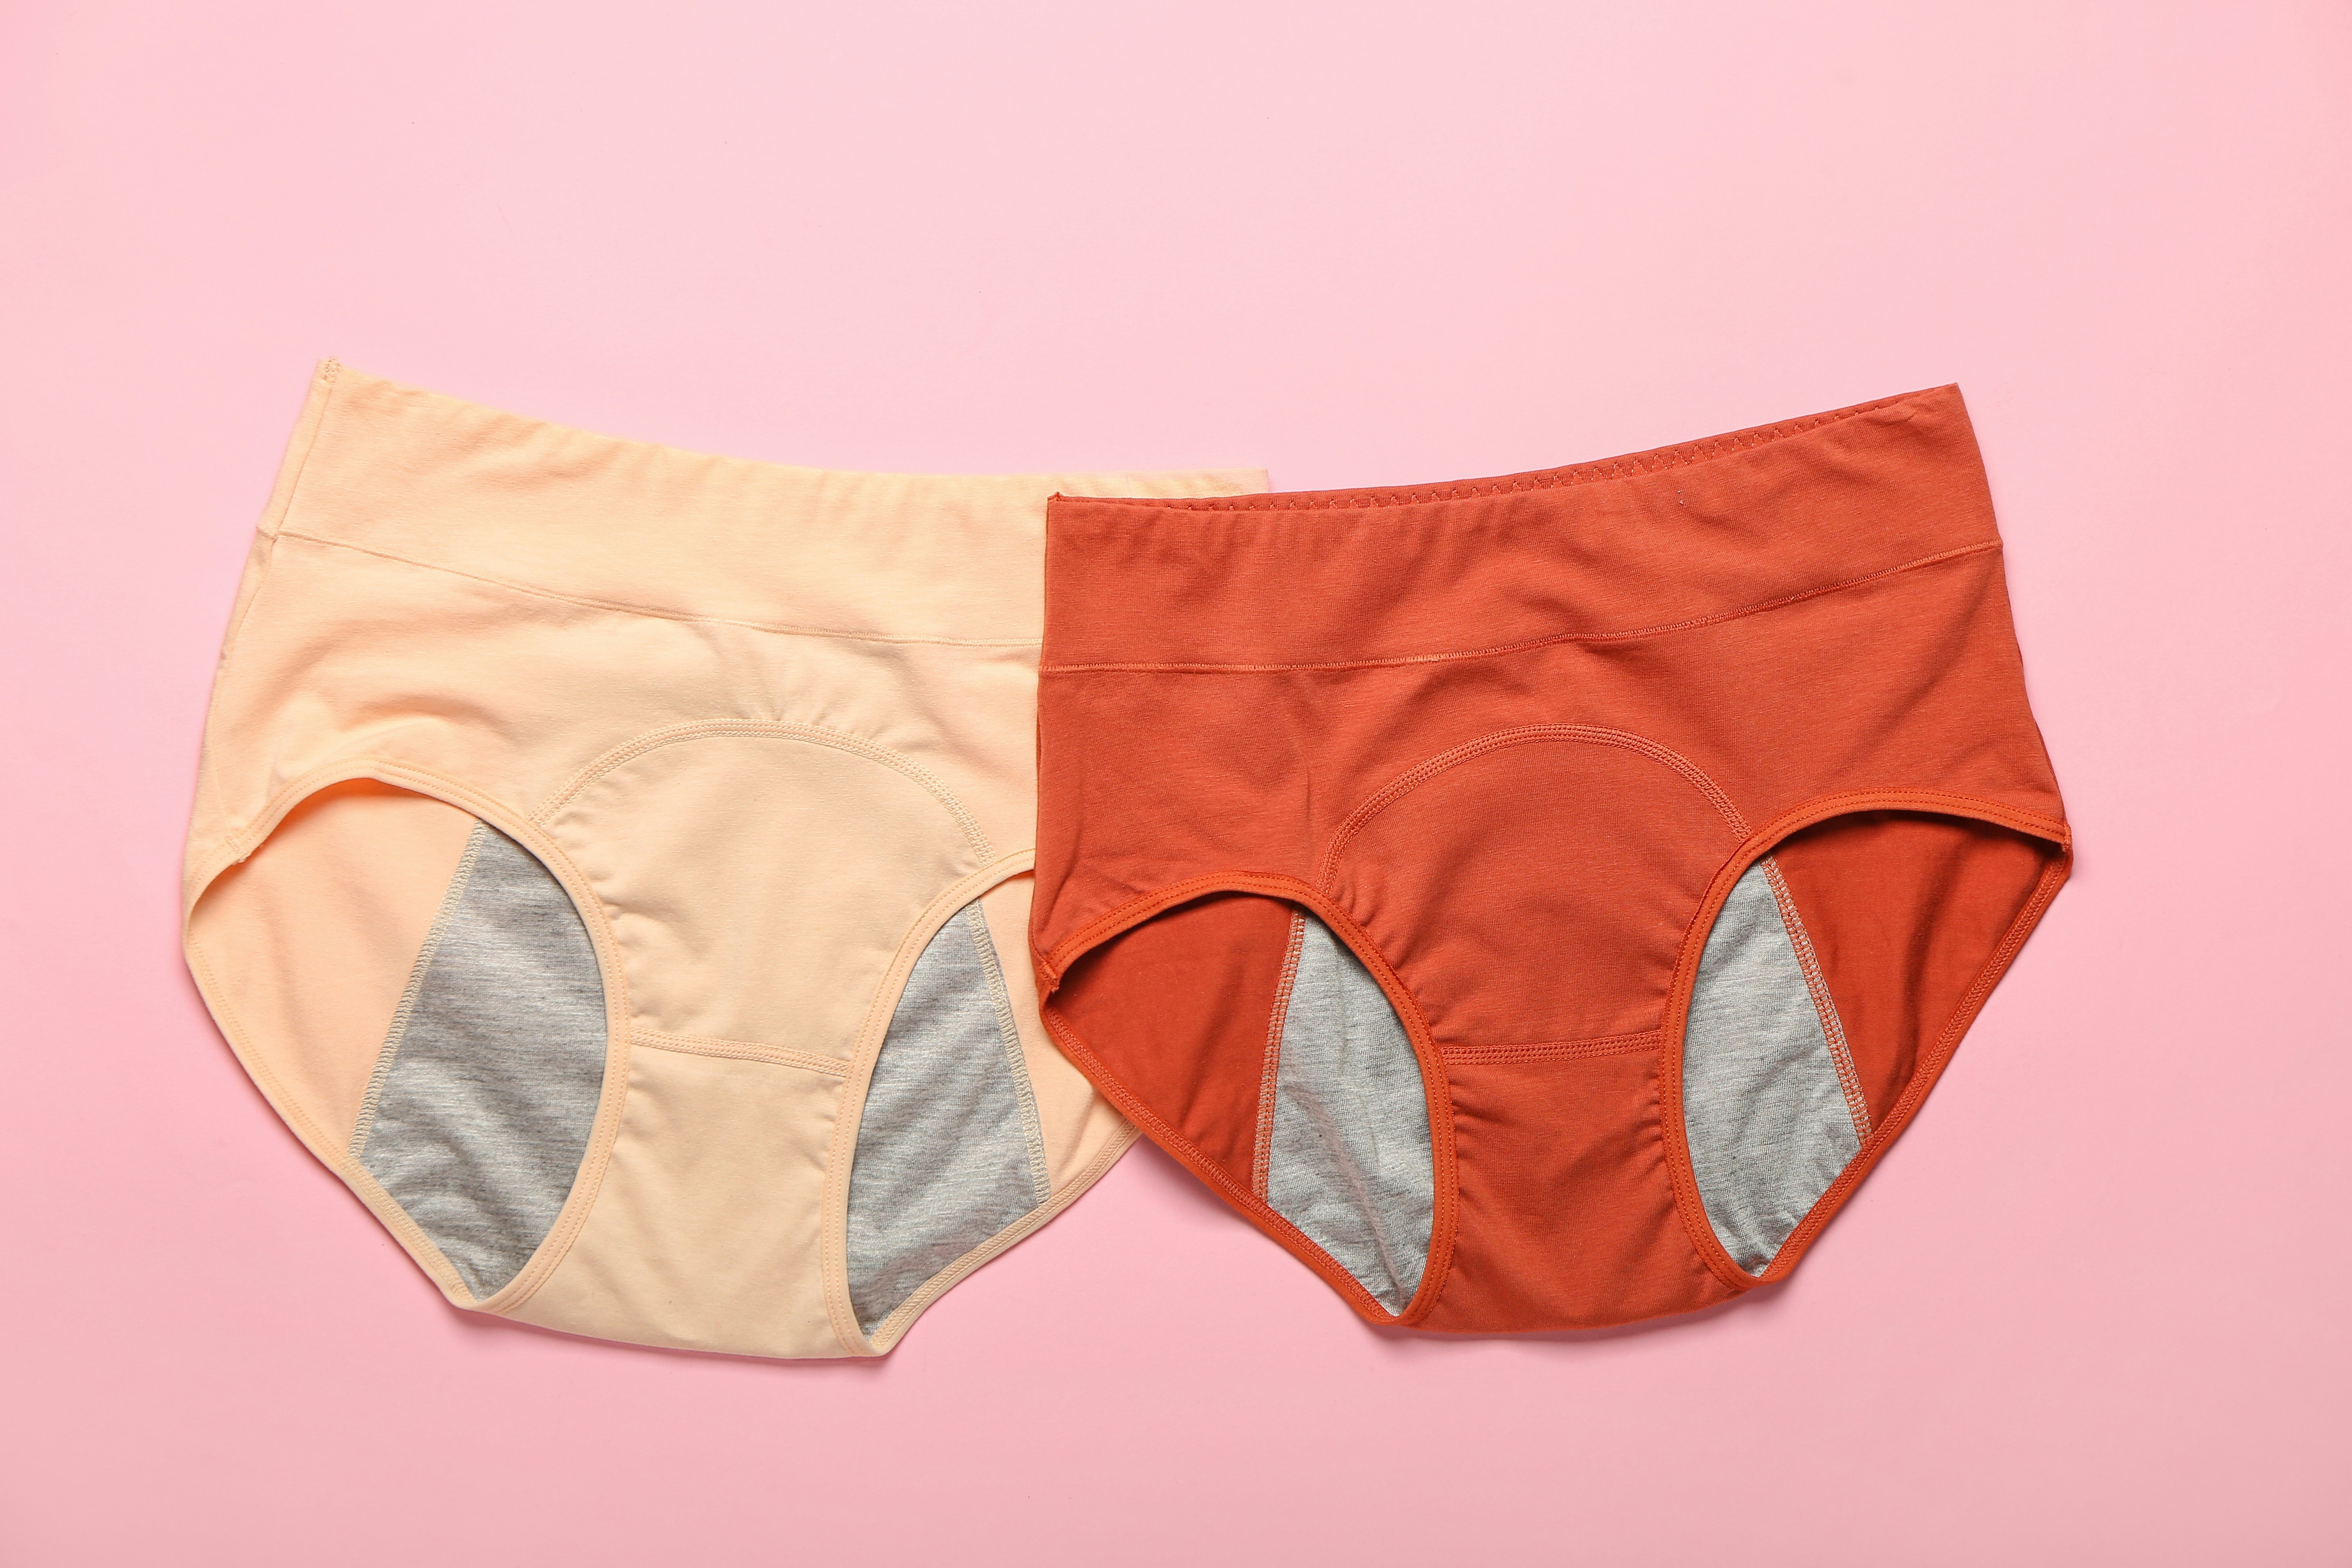 Are Period Pants Safe?